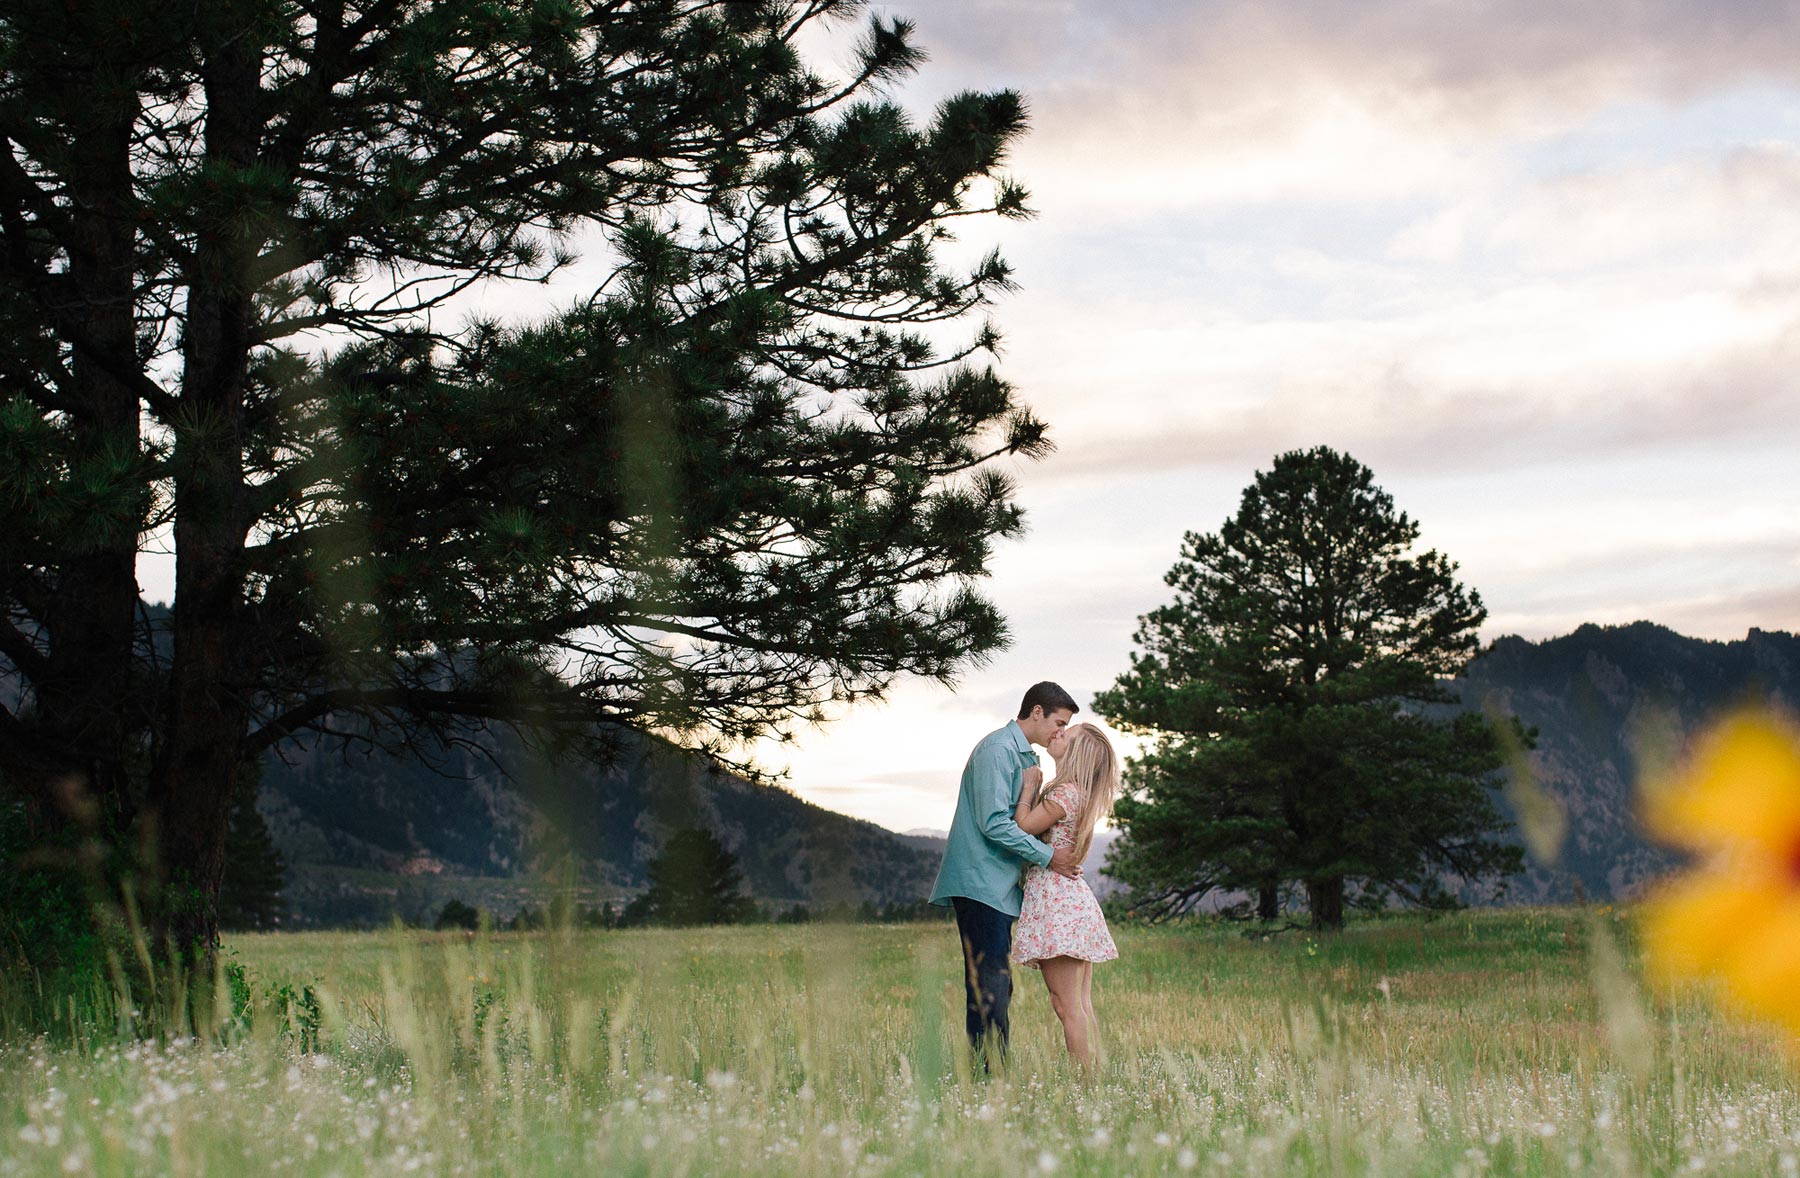 Irivng-Photography-Kerstyn-Korby-Colorado-Engagement-Photographers-019